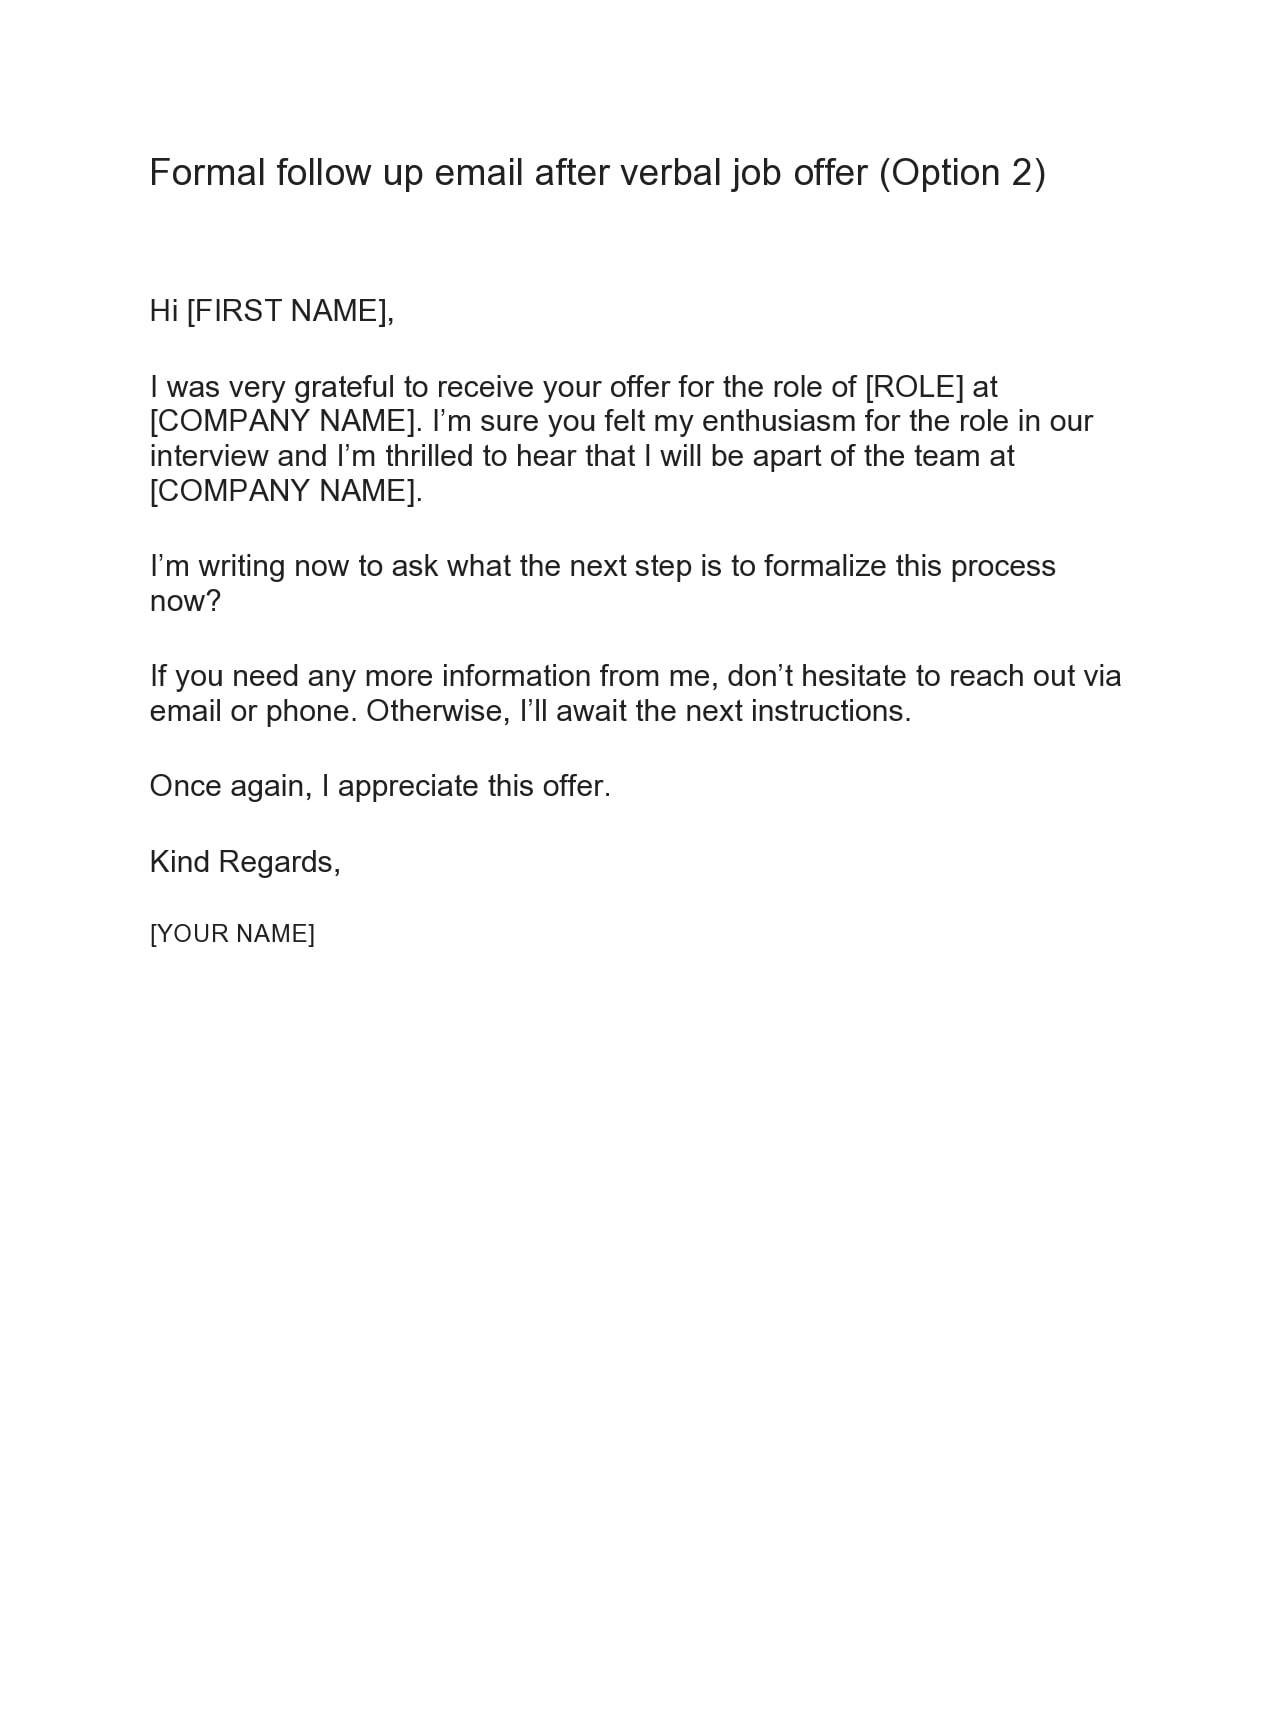 Formal Job Offer Letter from templatearchive.com